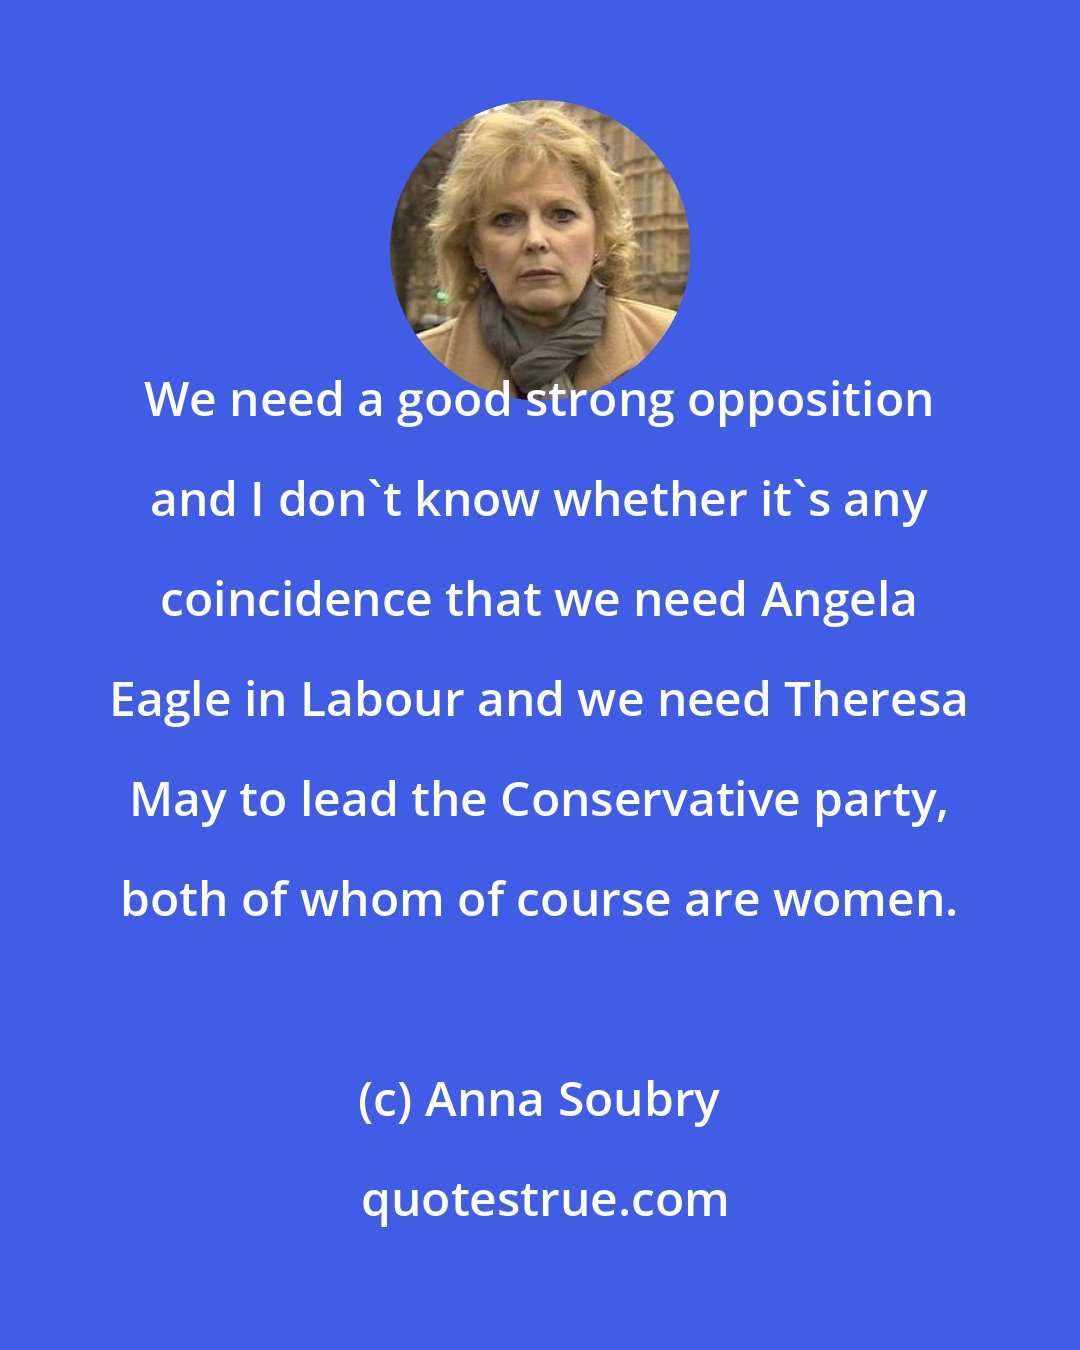 Anna Soubry: We need a good strong opposition and I don't know whether it's any coincidence that we need Angela Eagle in Labour and we need Theresa May to lead the Conservative party, both of whom of course are women.